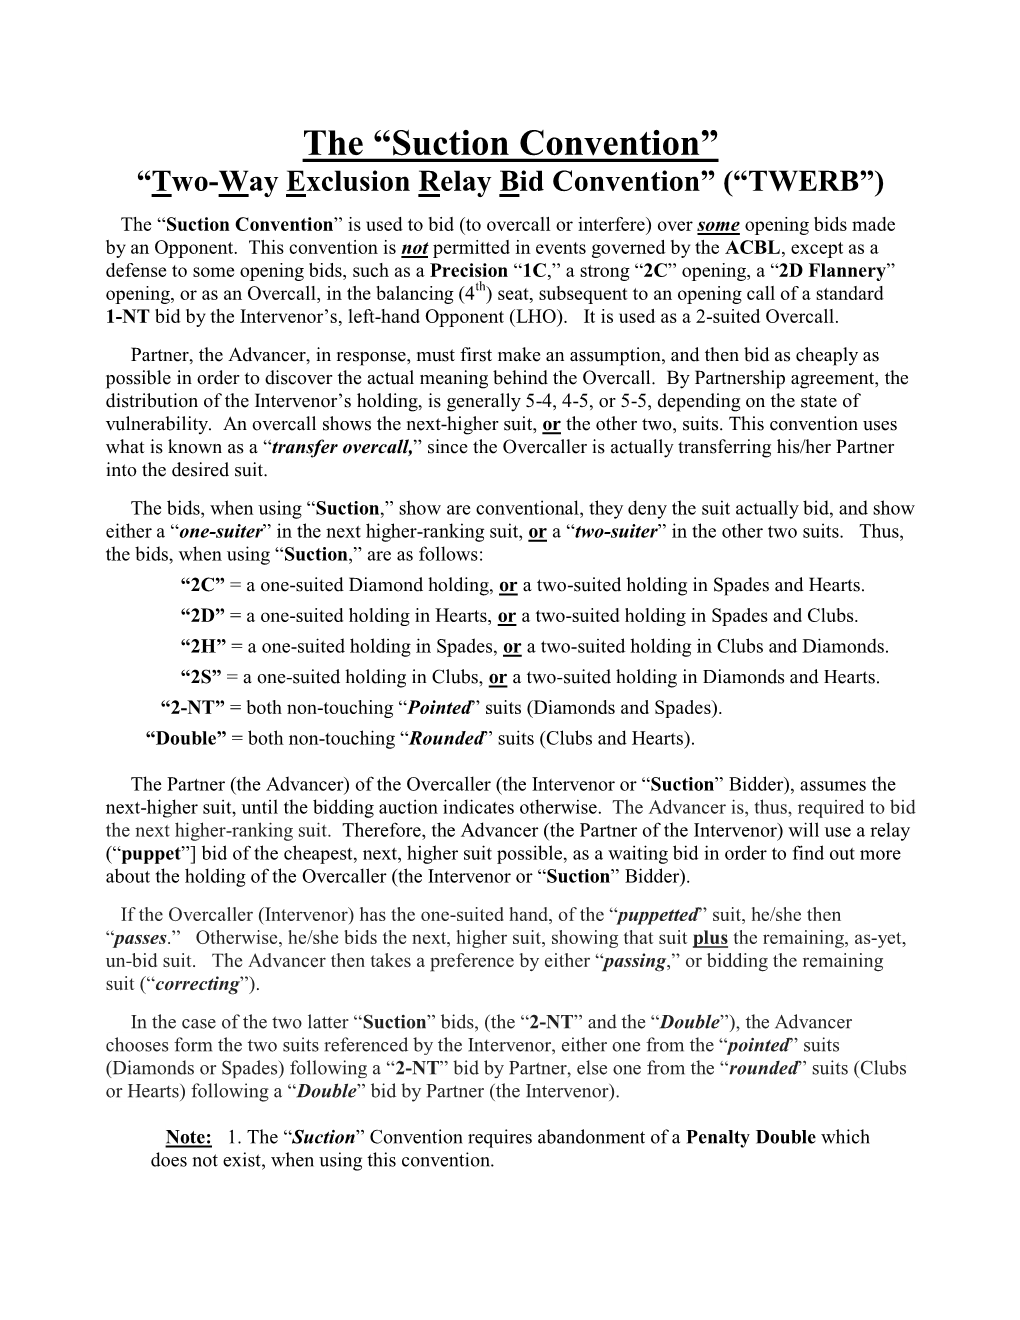 The “Suction Convention” “Two-Way Exclusion Relay Bid Convention” (“TWERB”)